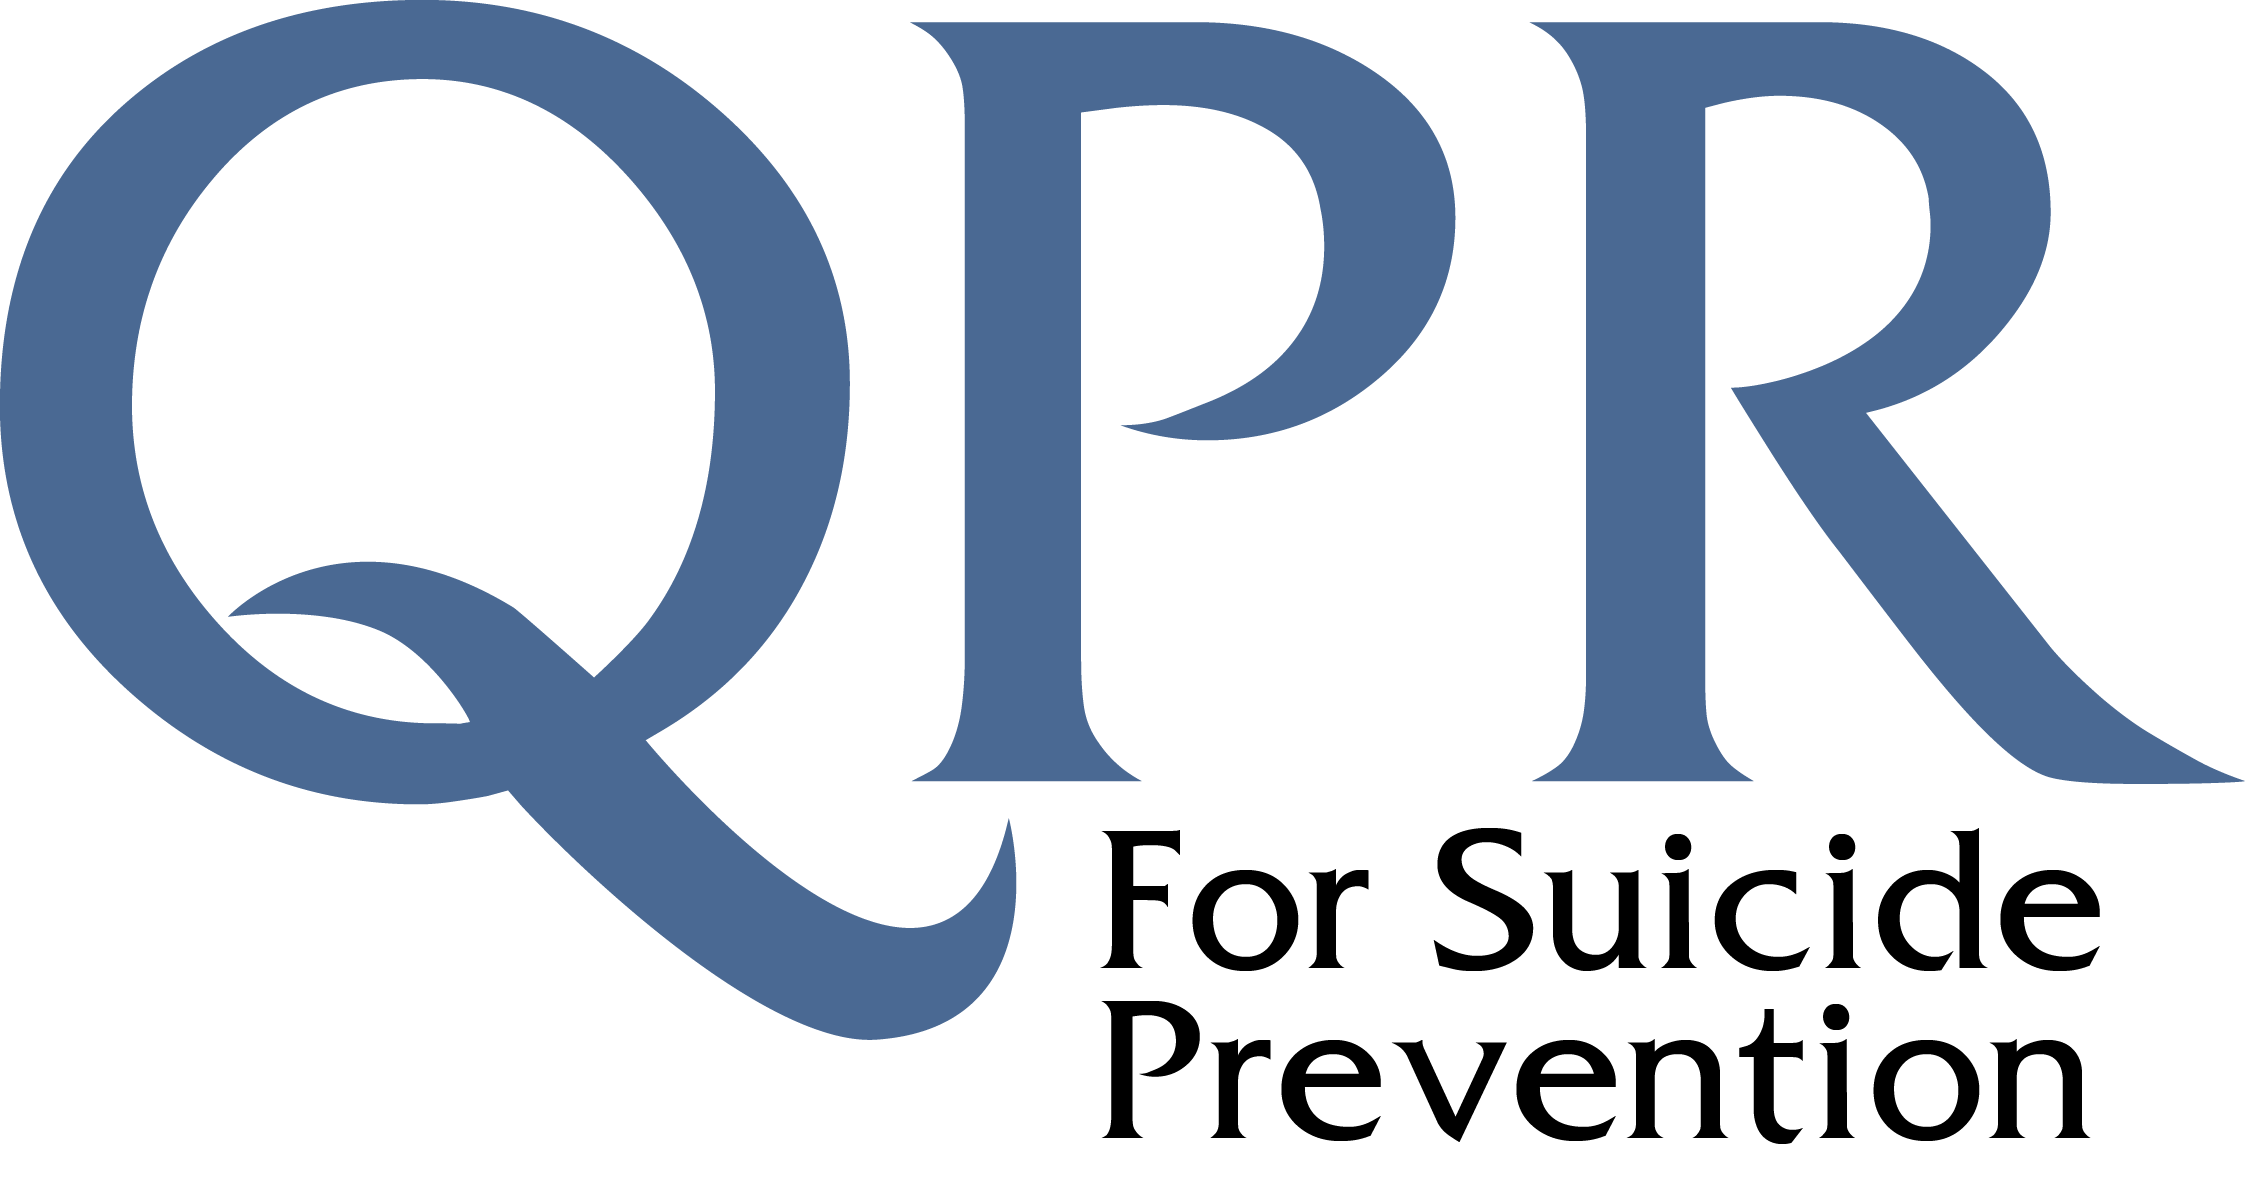 QPR - Suicide Gatekeeper Training (May 22nd) 